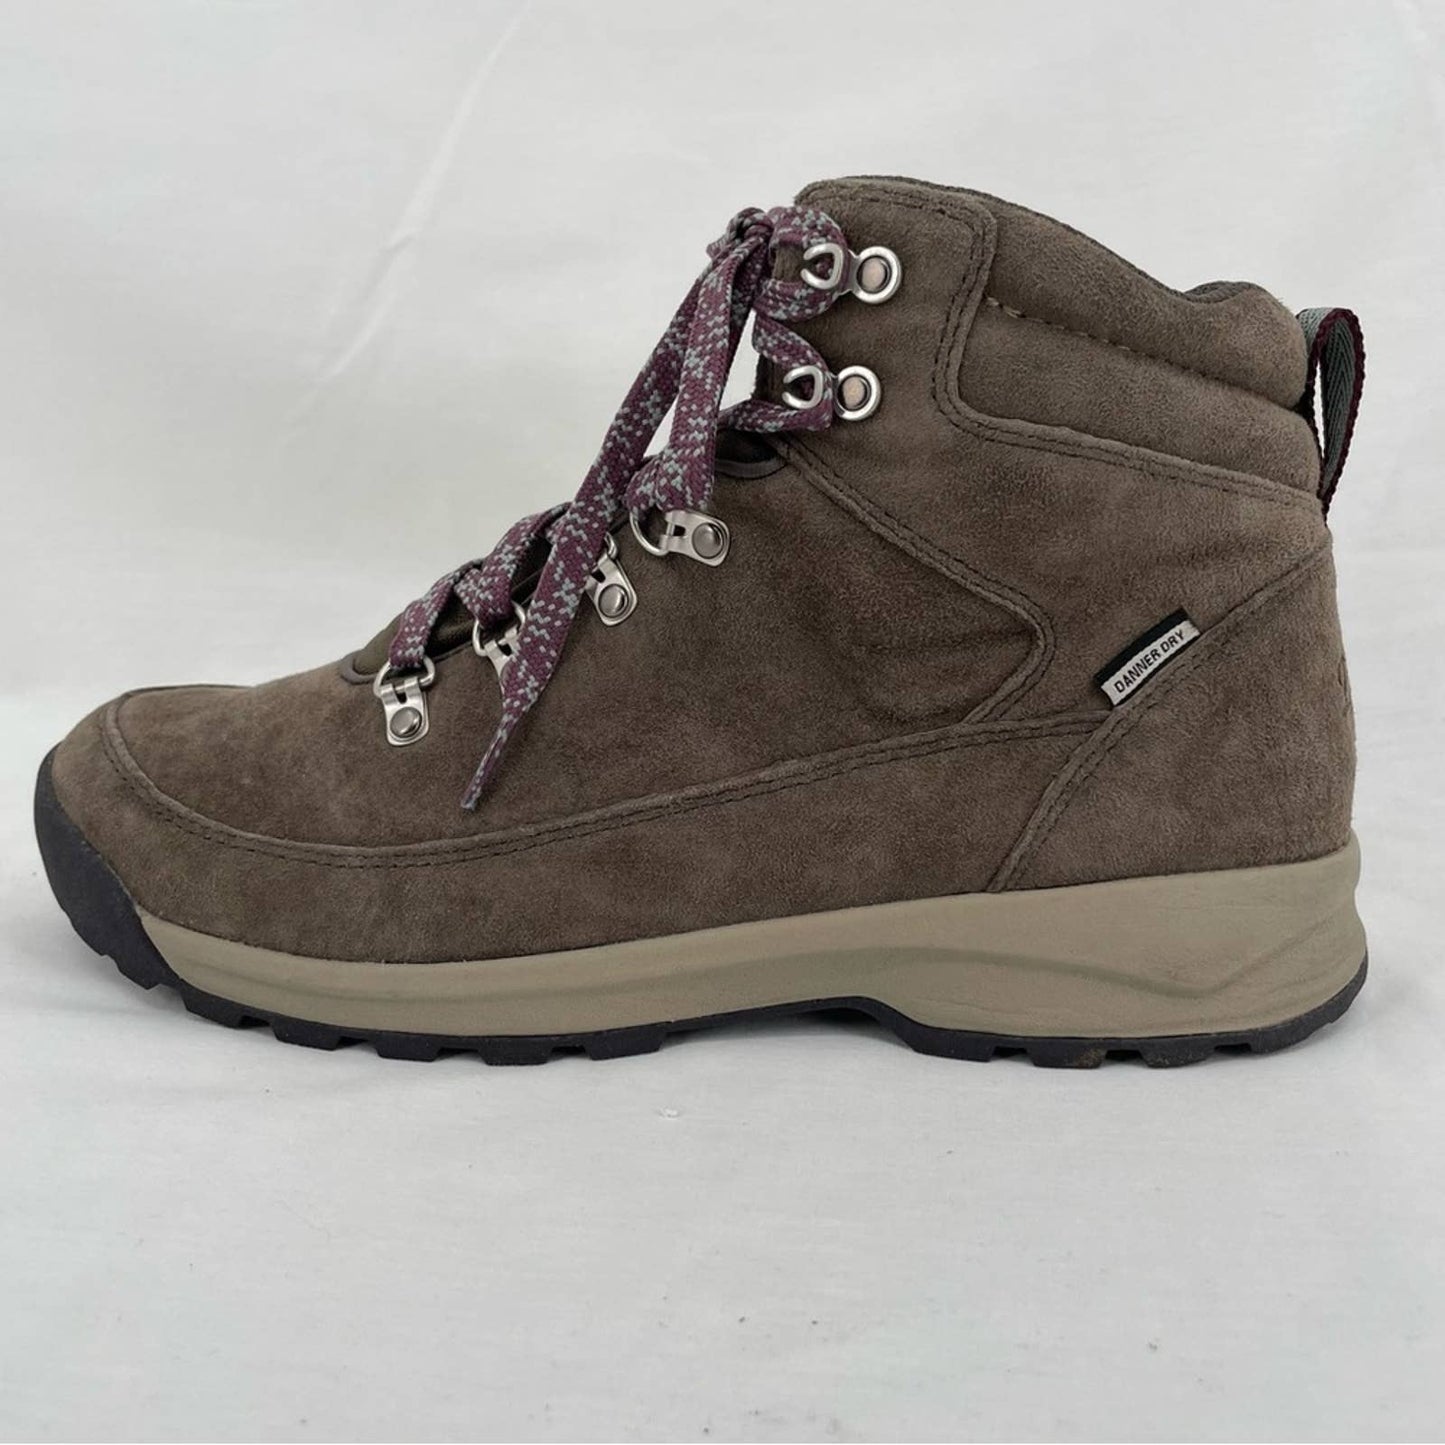 Danner Adrika Hiker Ash Water-resistant Suede Classic Taupe Tan Hiking Boots Size 10